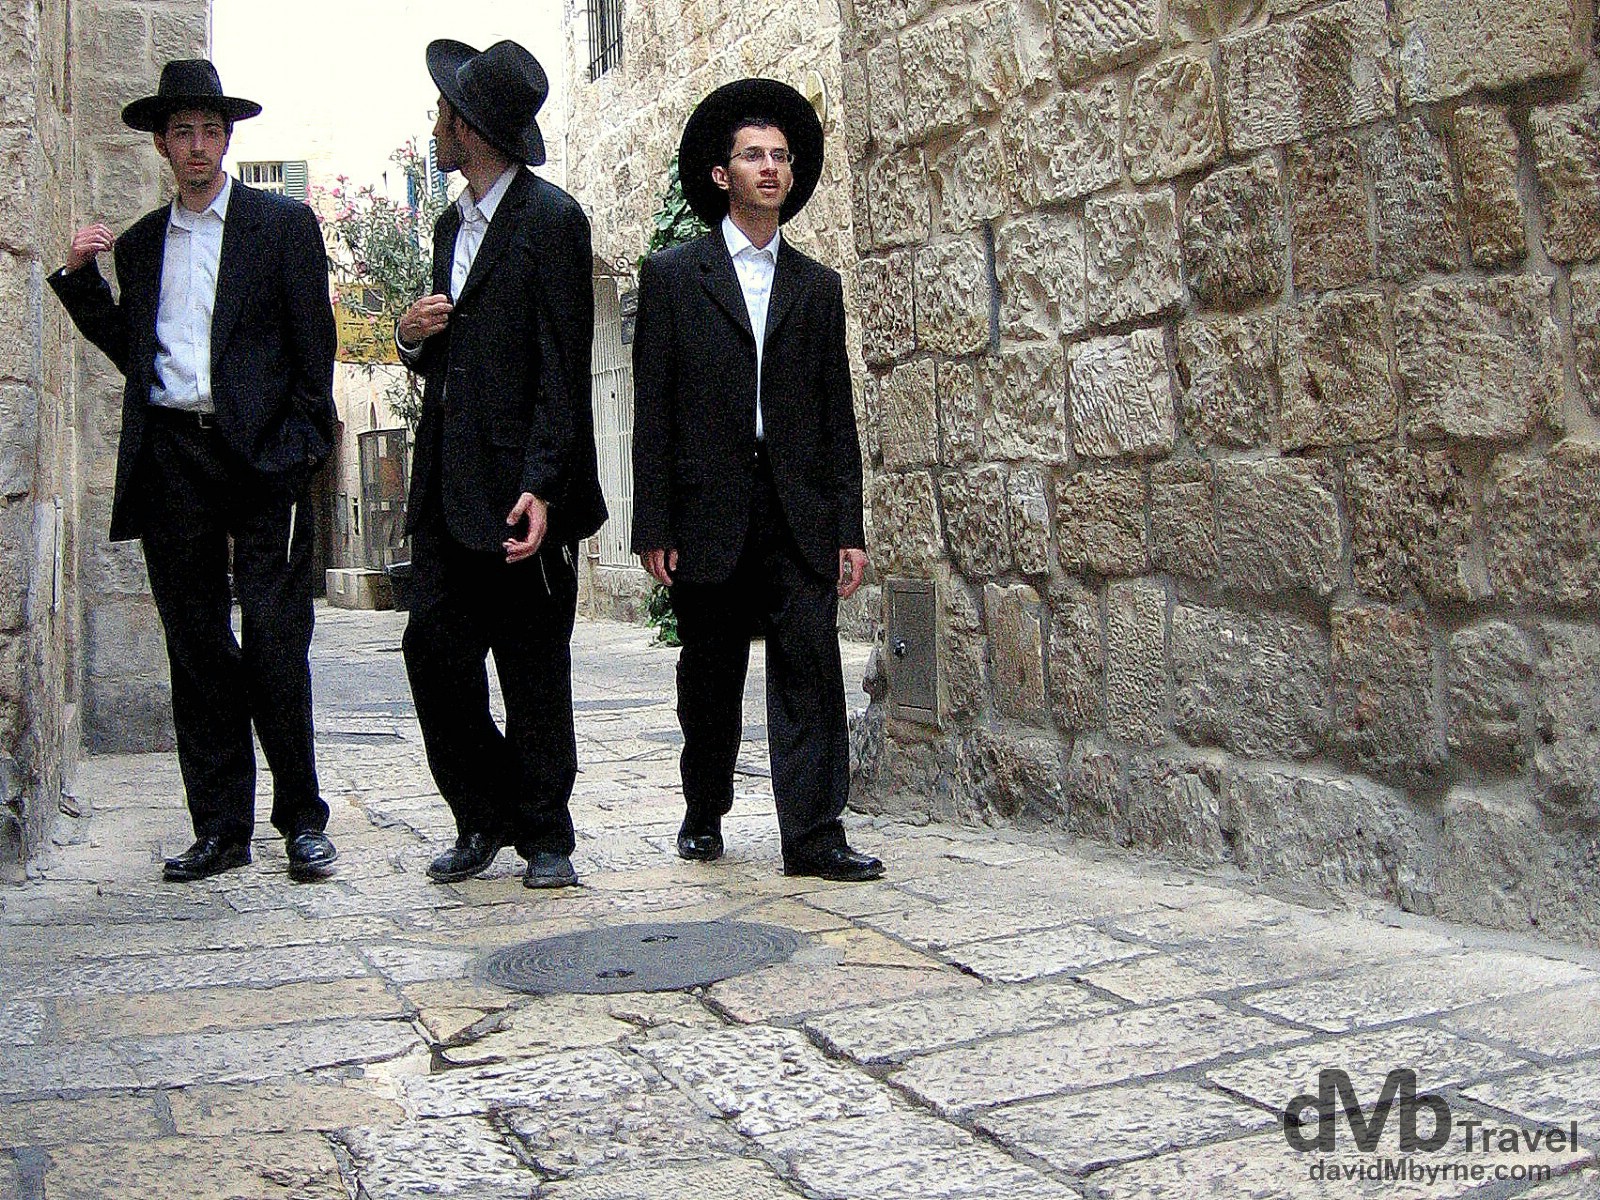 Ultra-orthodox Jews in the lanes of the Old City of Jerusalem, Israel. May 2, 2008.